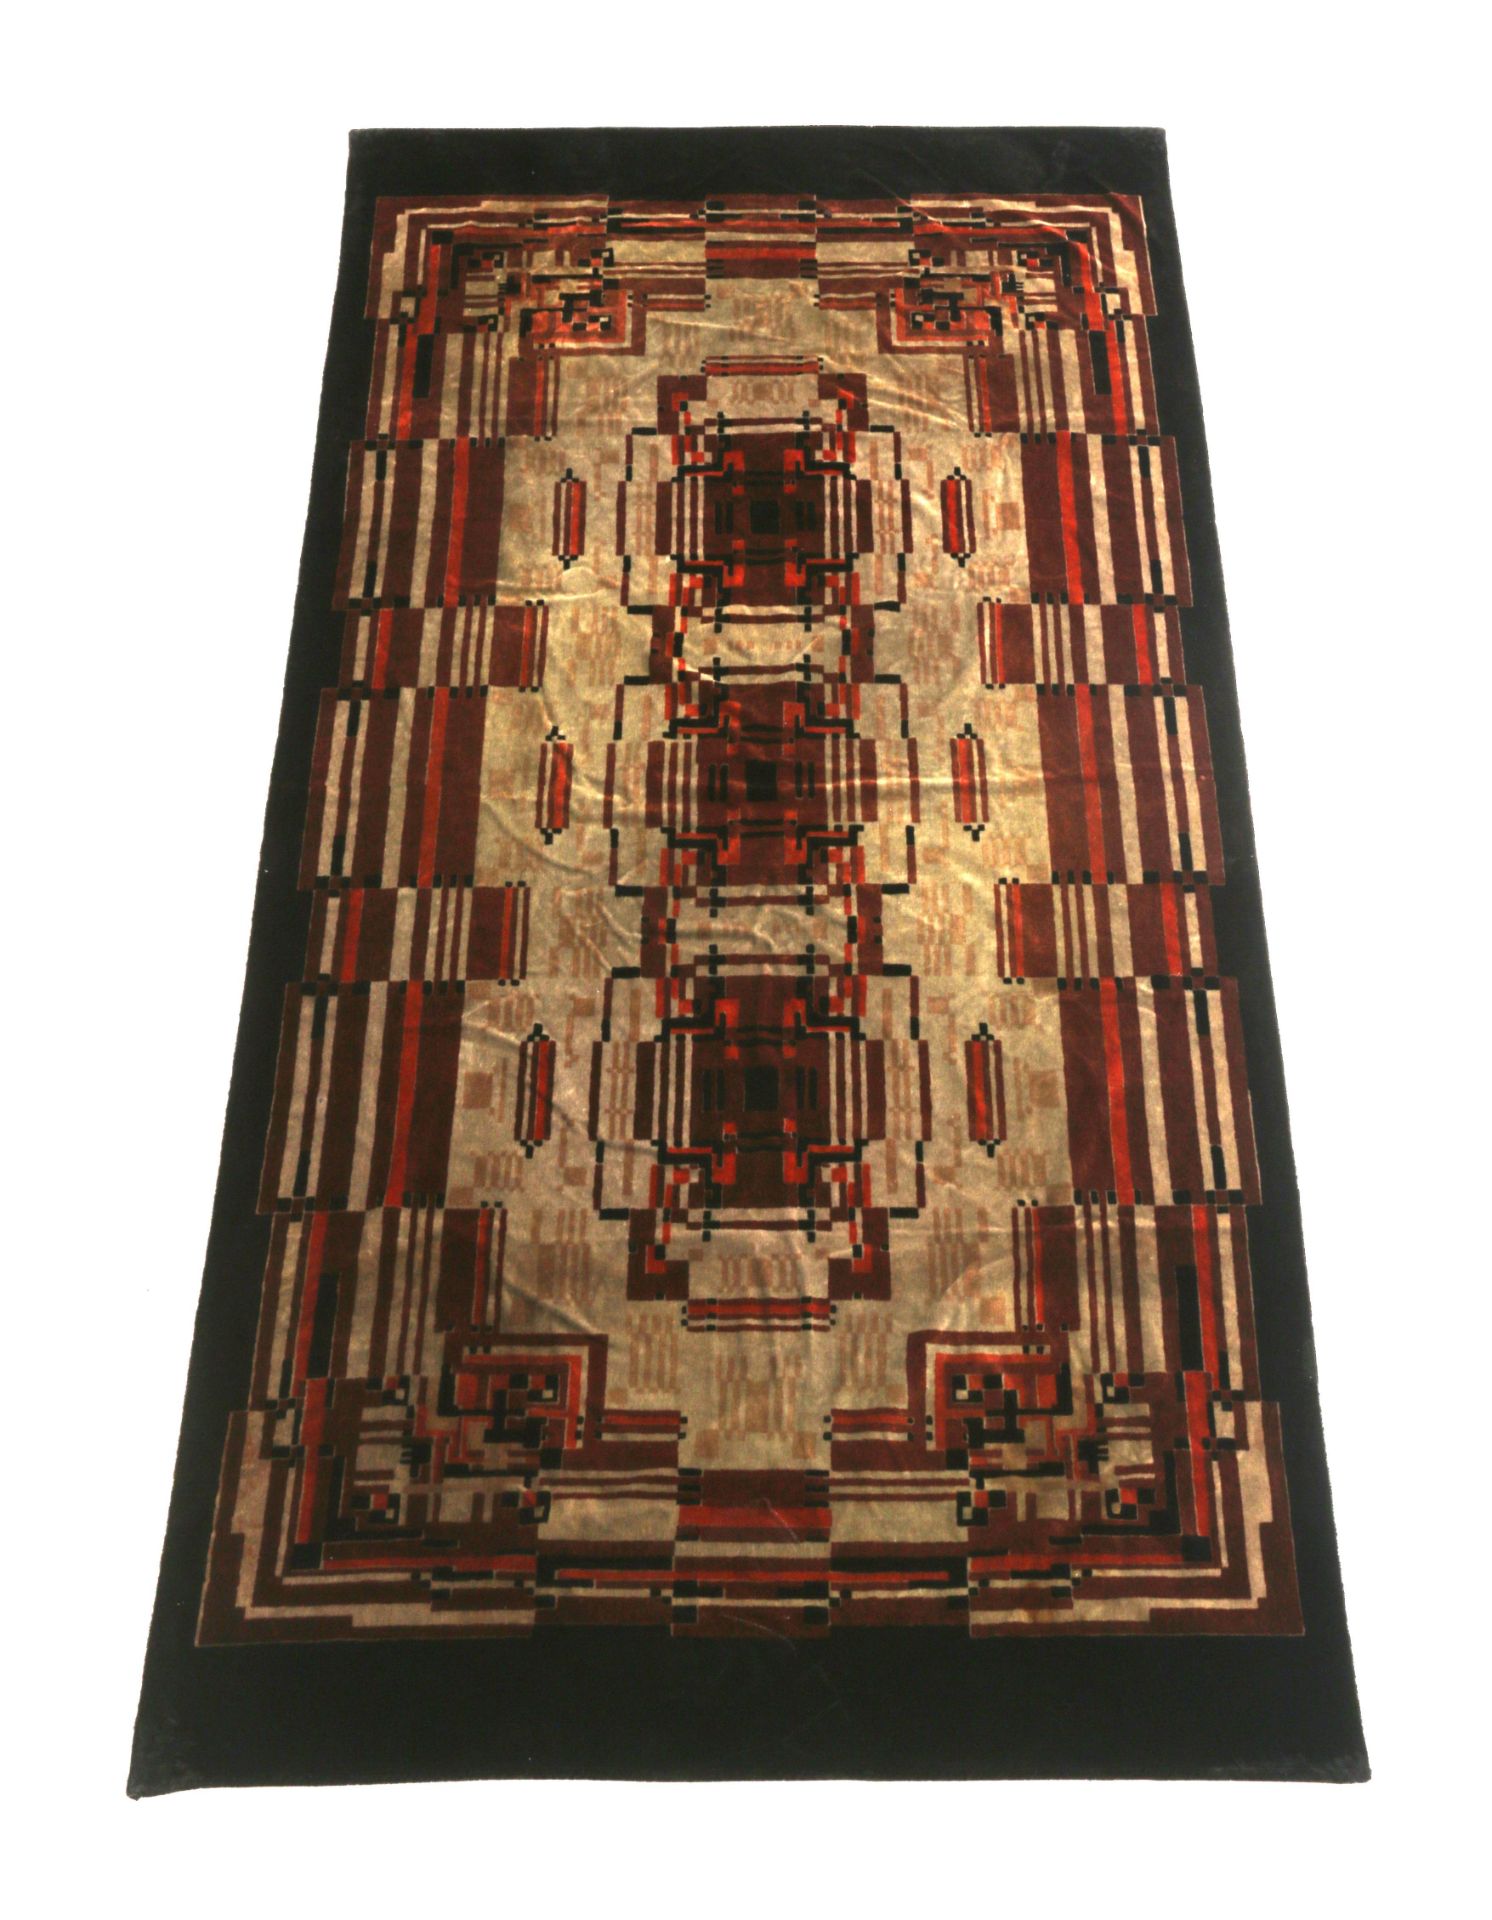 Amsterdamse School A large sofa carpet decorated with geometrical pattern in shades of brown and